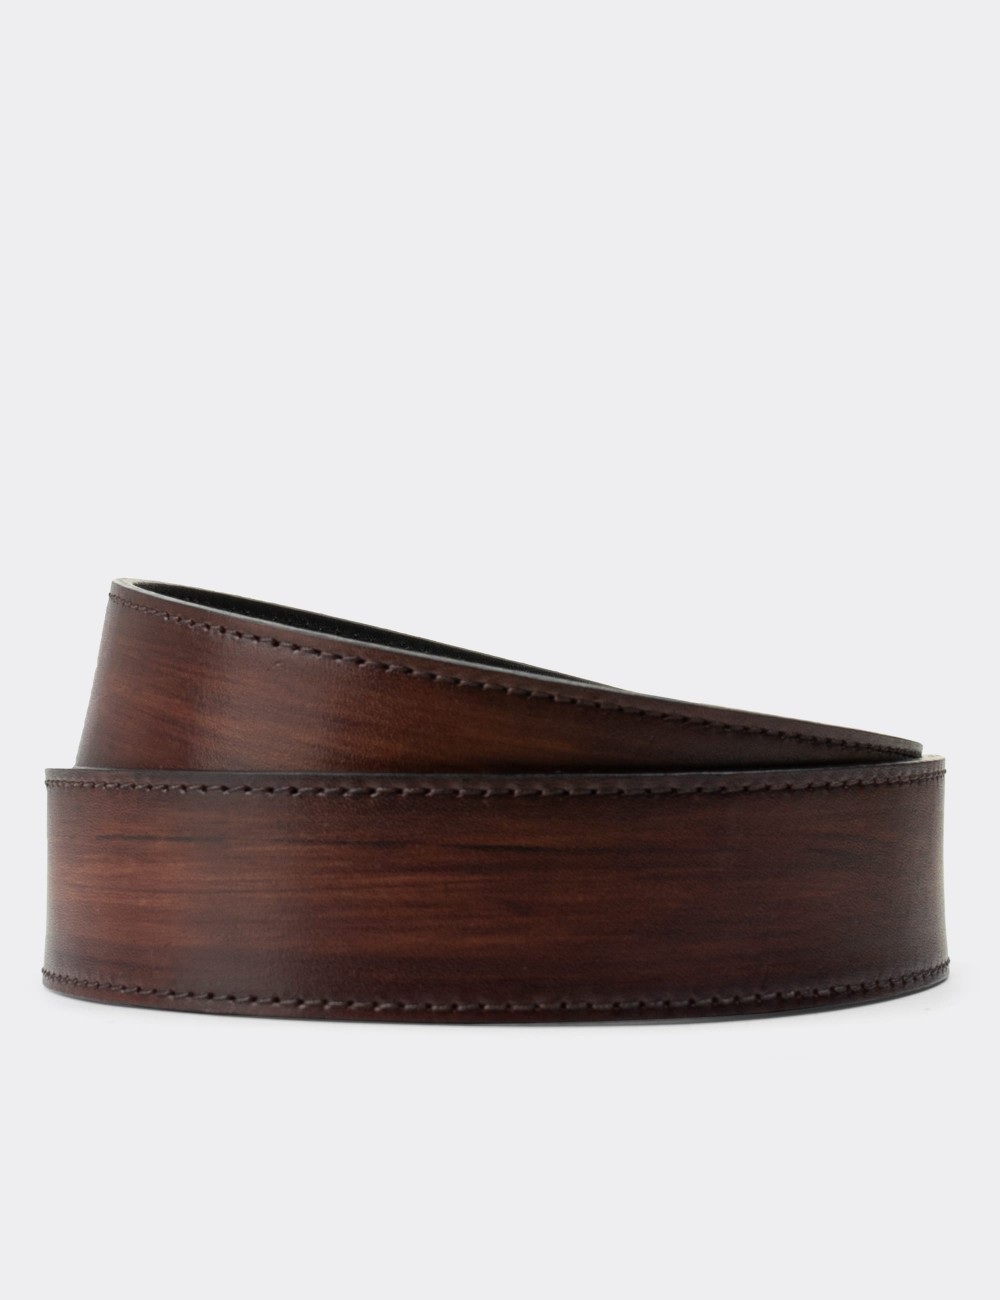  Leather Tan and Black Double Sided Men's Belt - K0409MTBAW01